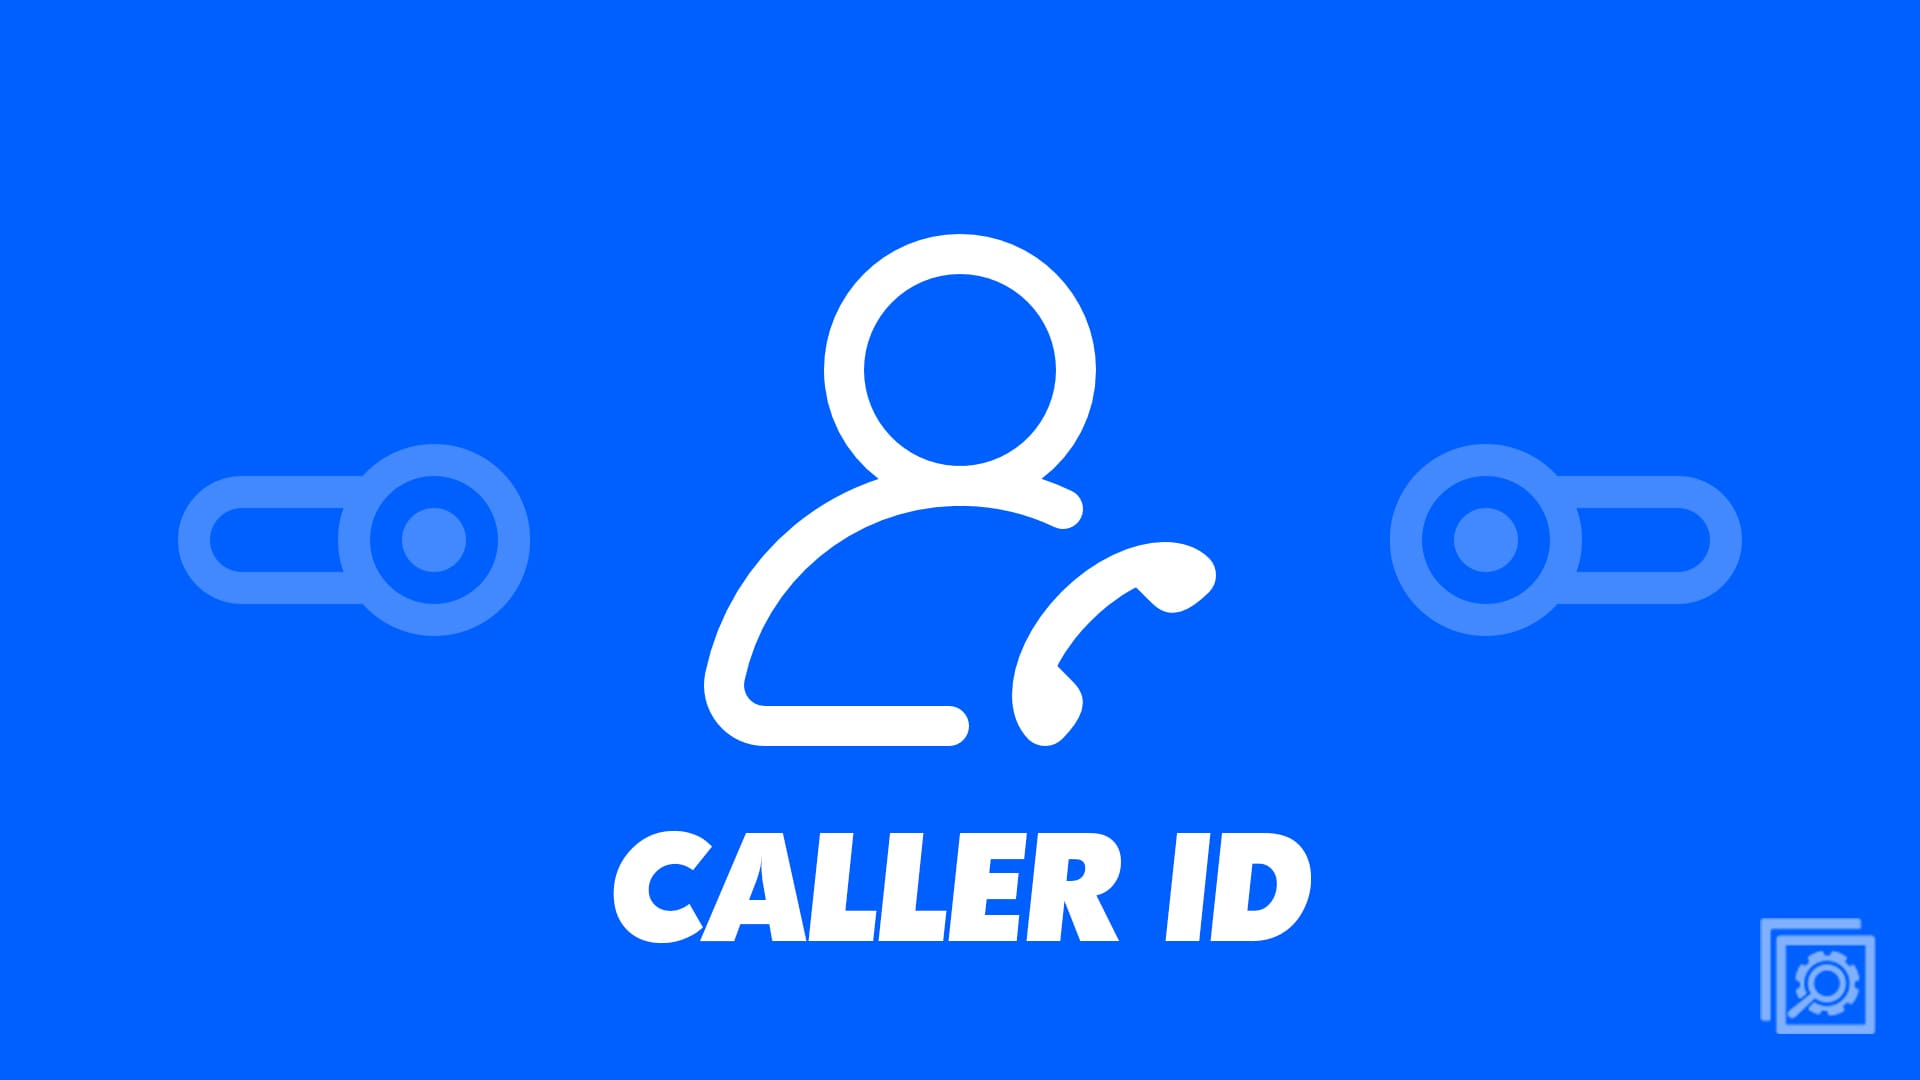 iPhone: Enable or Disable Caller ID